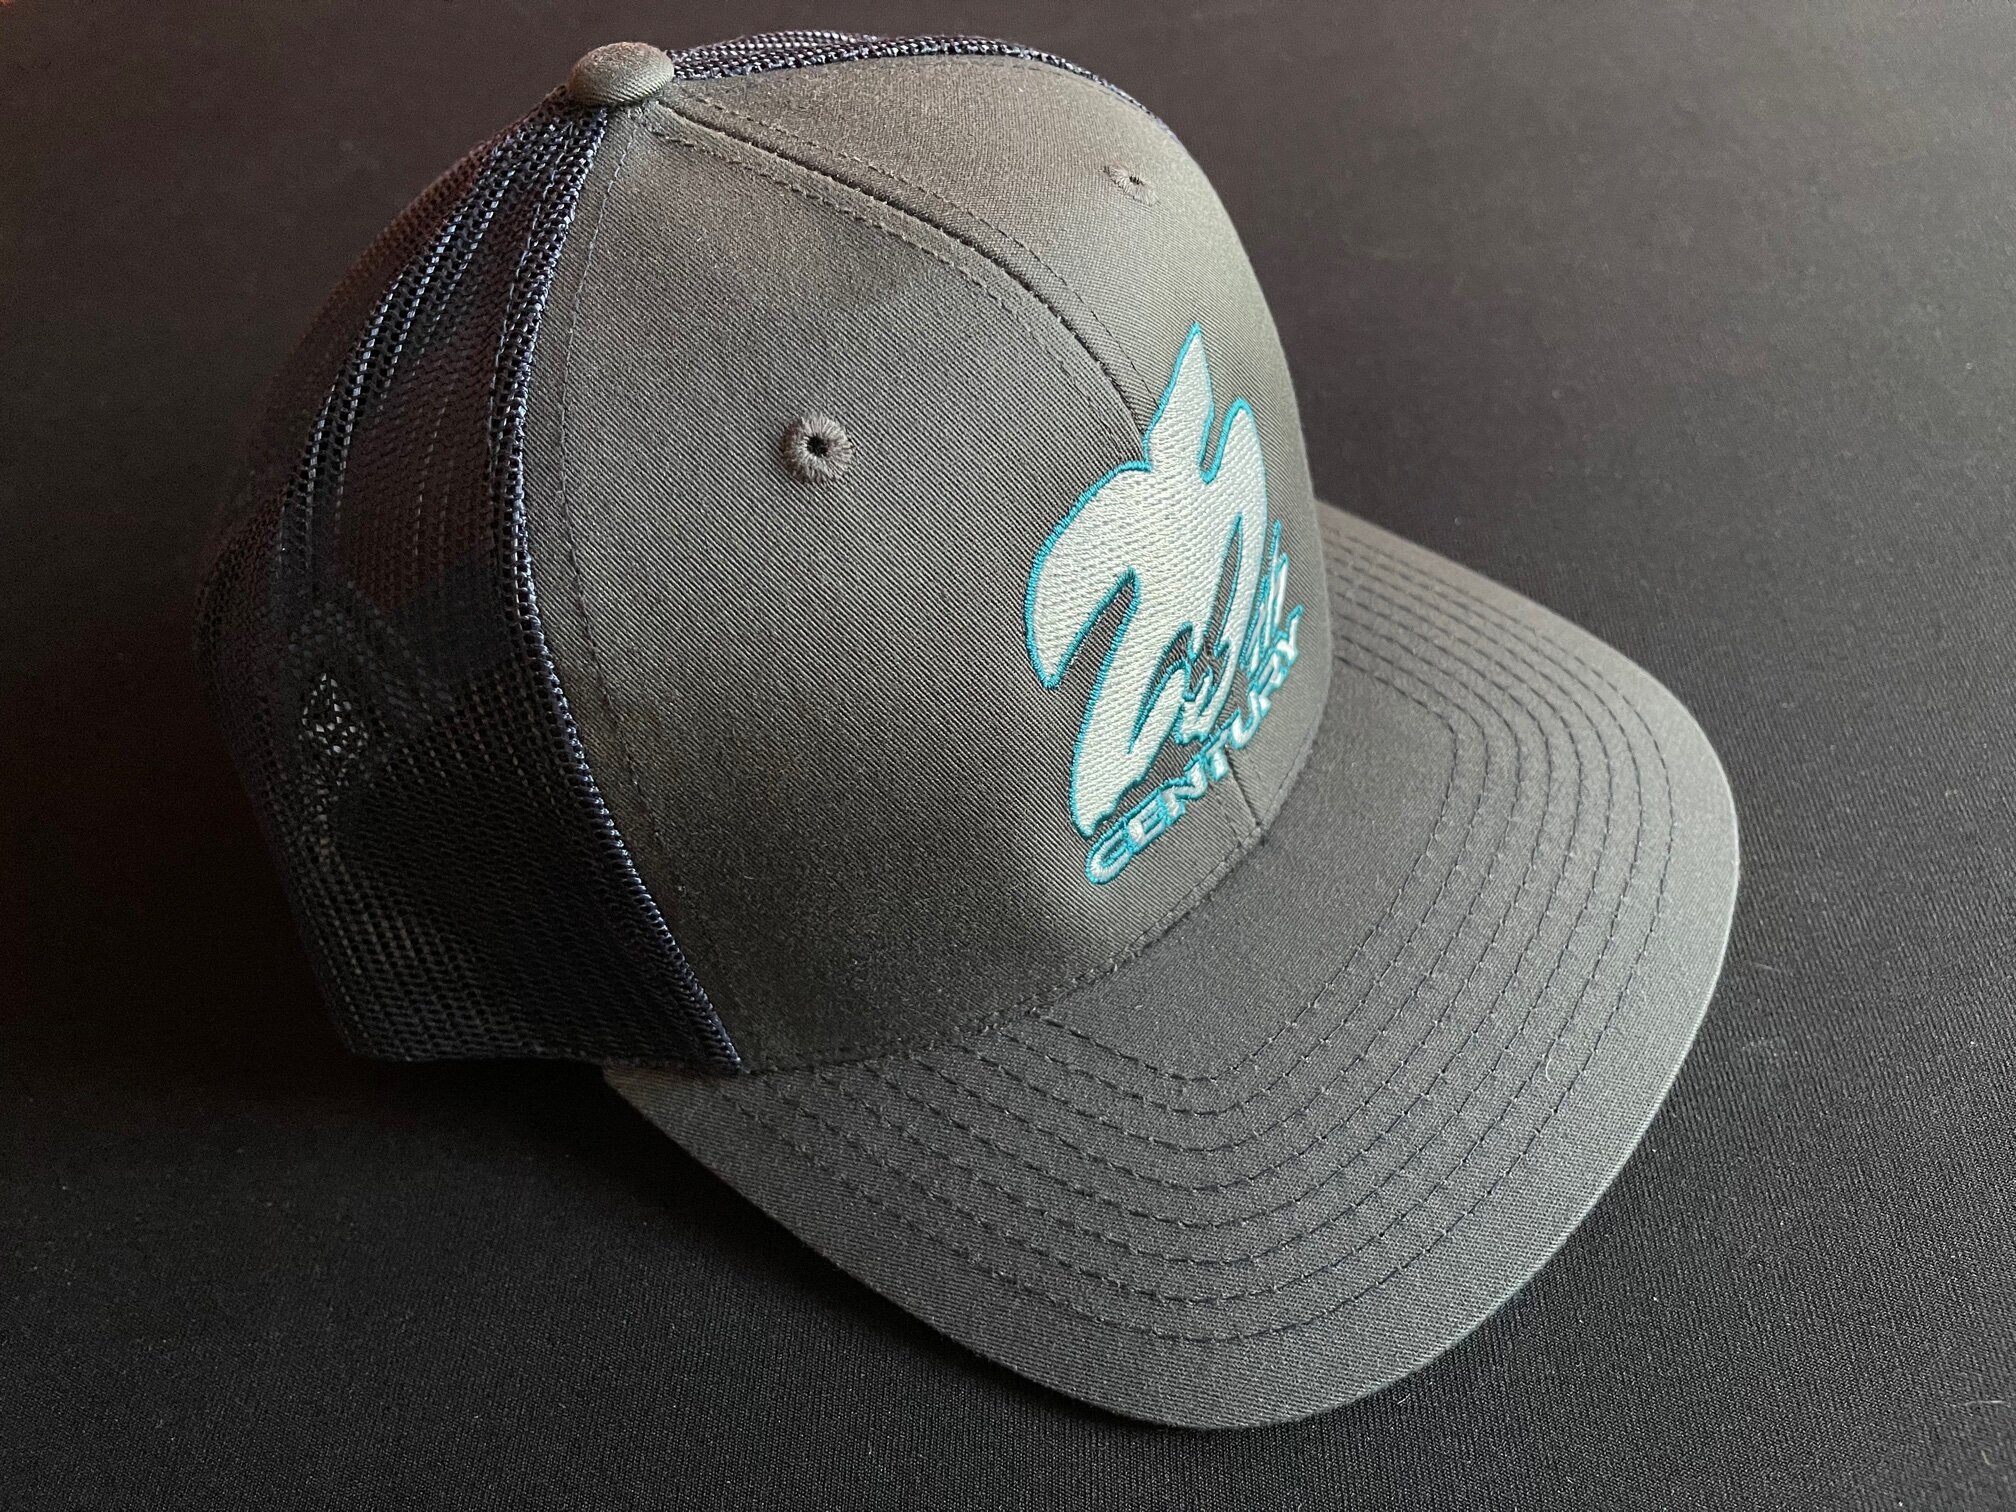 25th Century Embroidered Hats — 25th Century Games